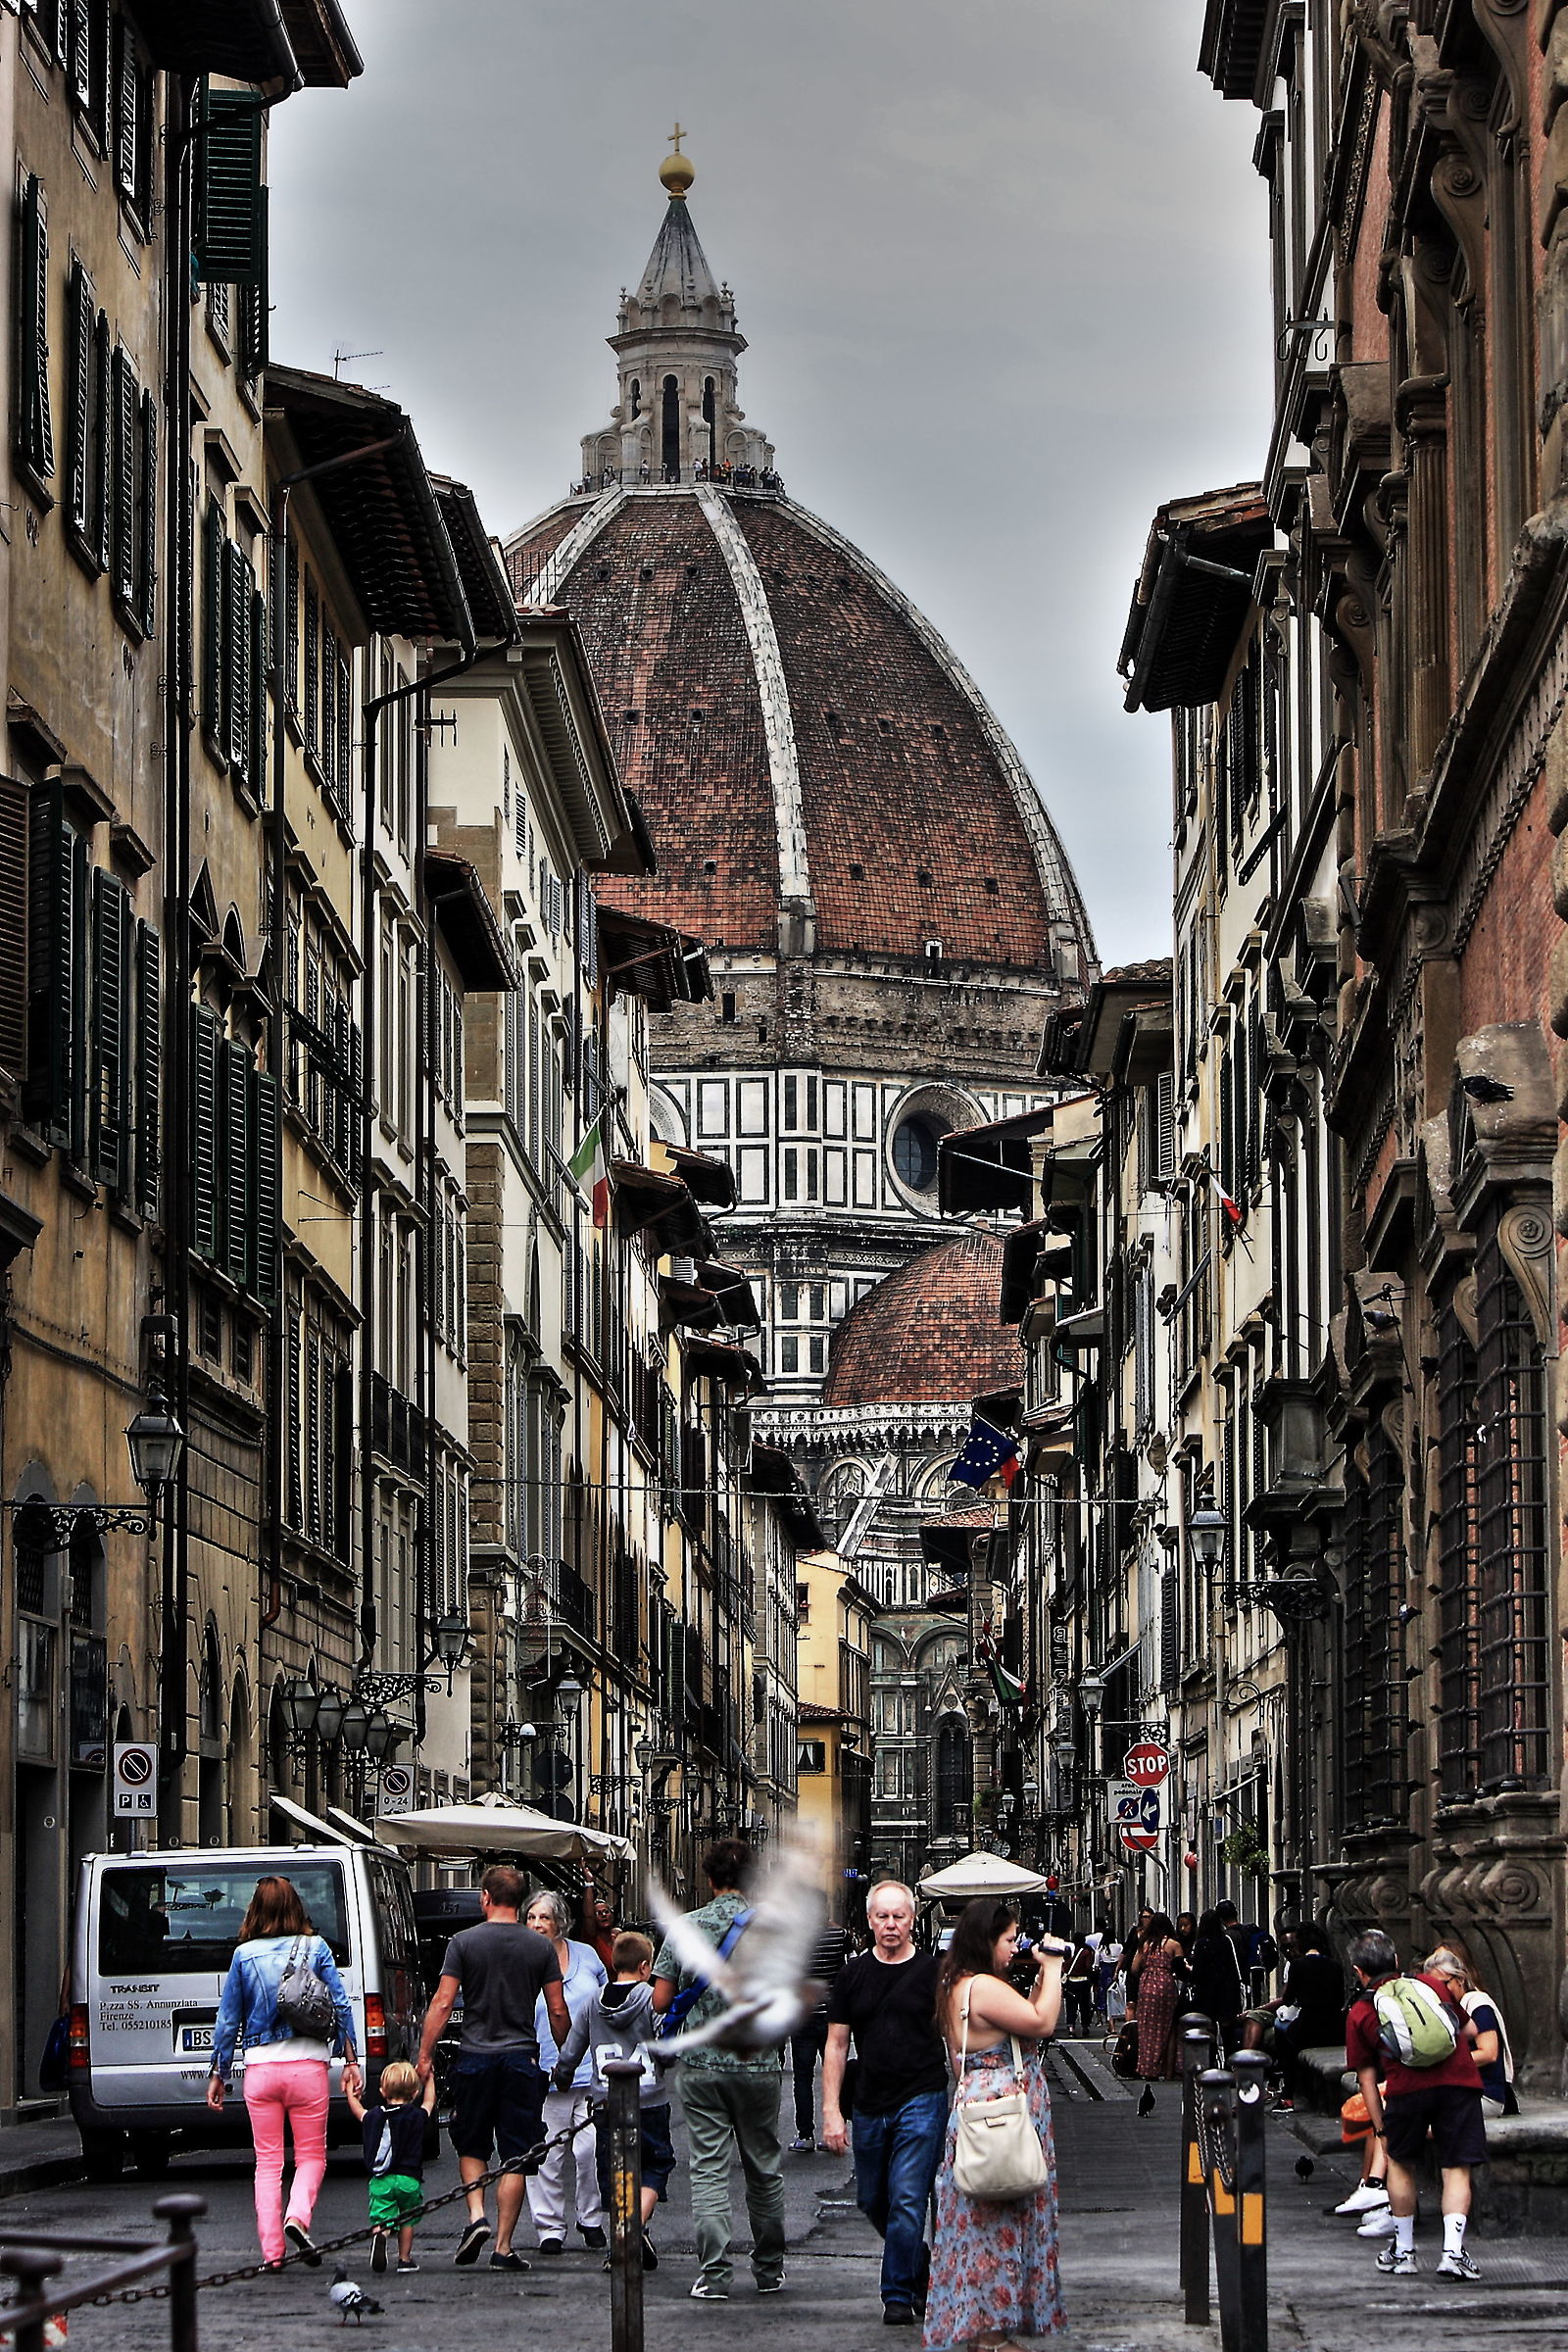 In Florence there is the dome of ' Bbrunelleschi...